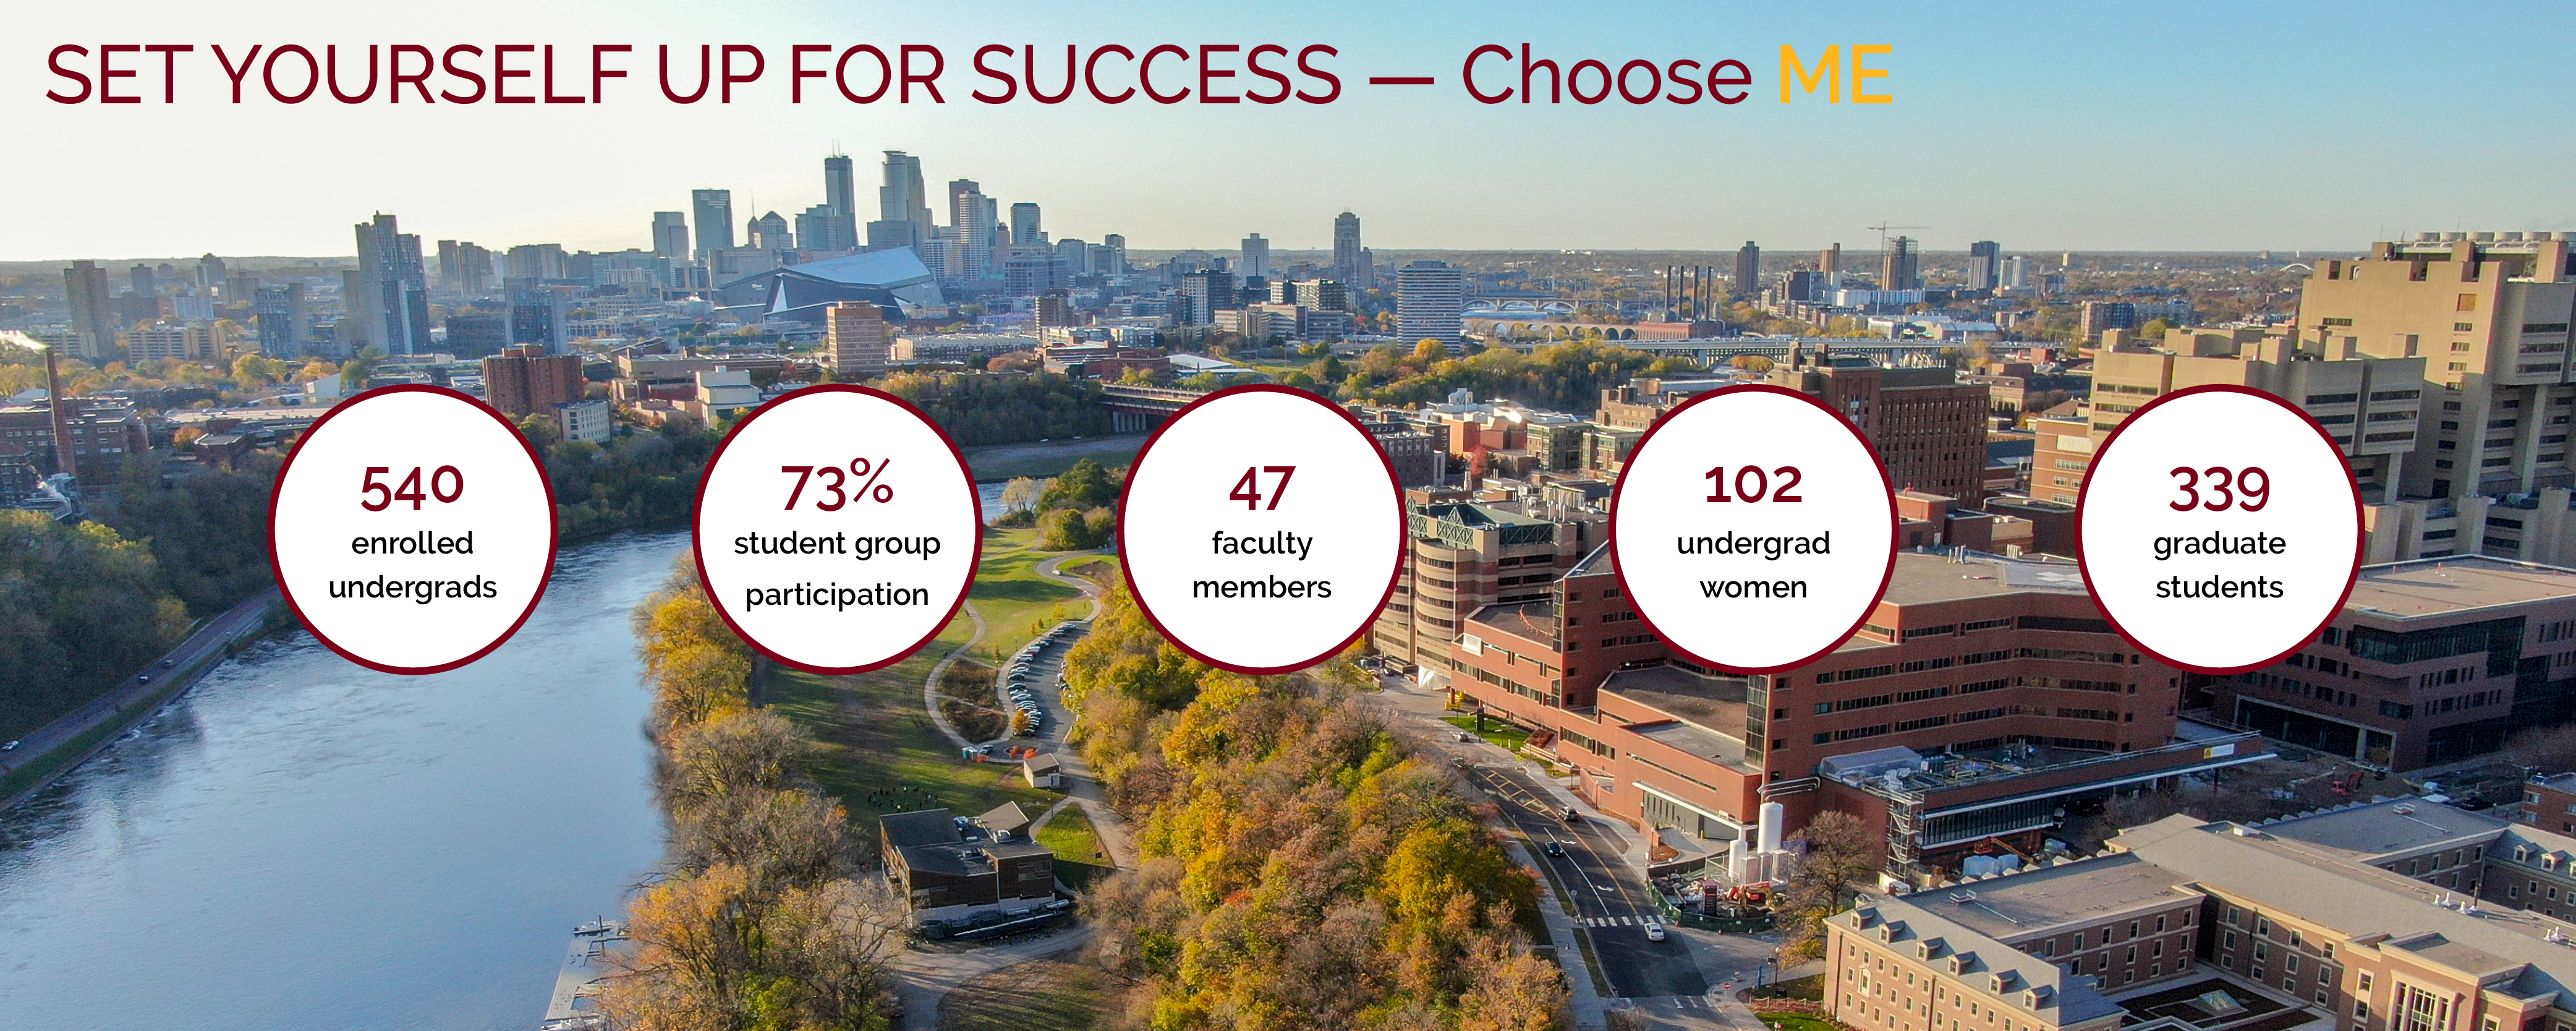 graphic showing UMN campus with statistics about the department: 540 undergraduates, 73% student group participation, 47 faculty members, 102 undergrad women, 339 graduate students